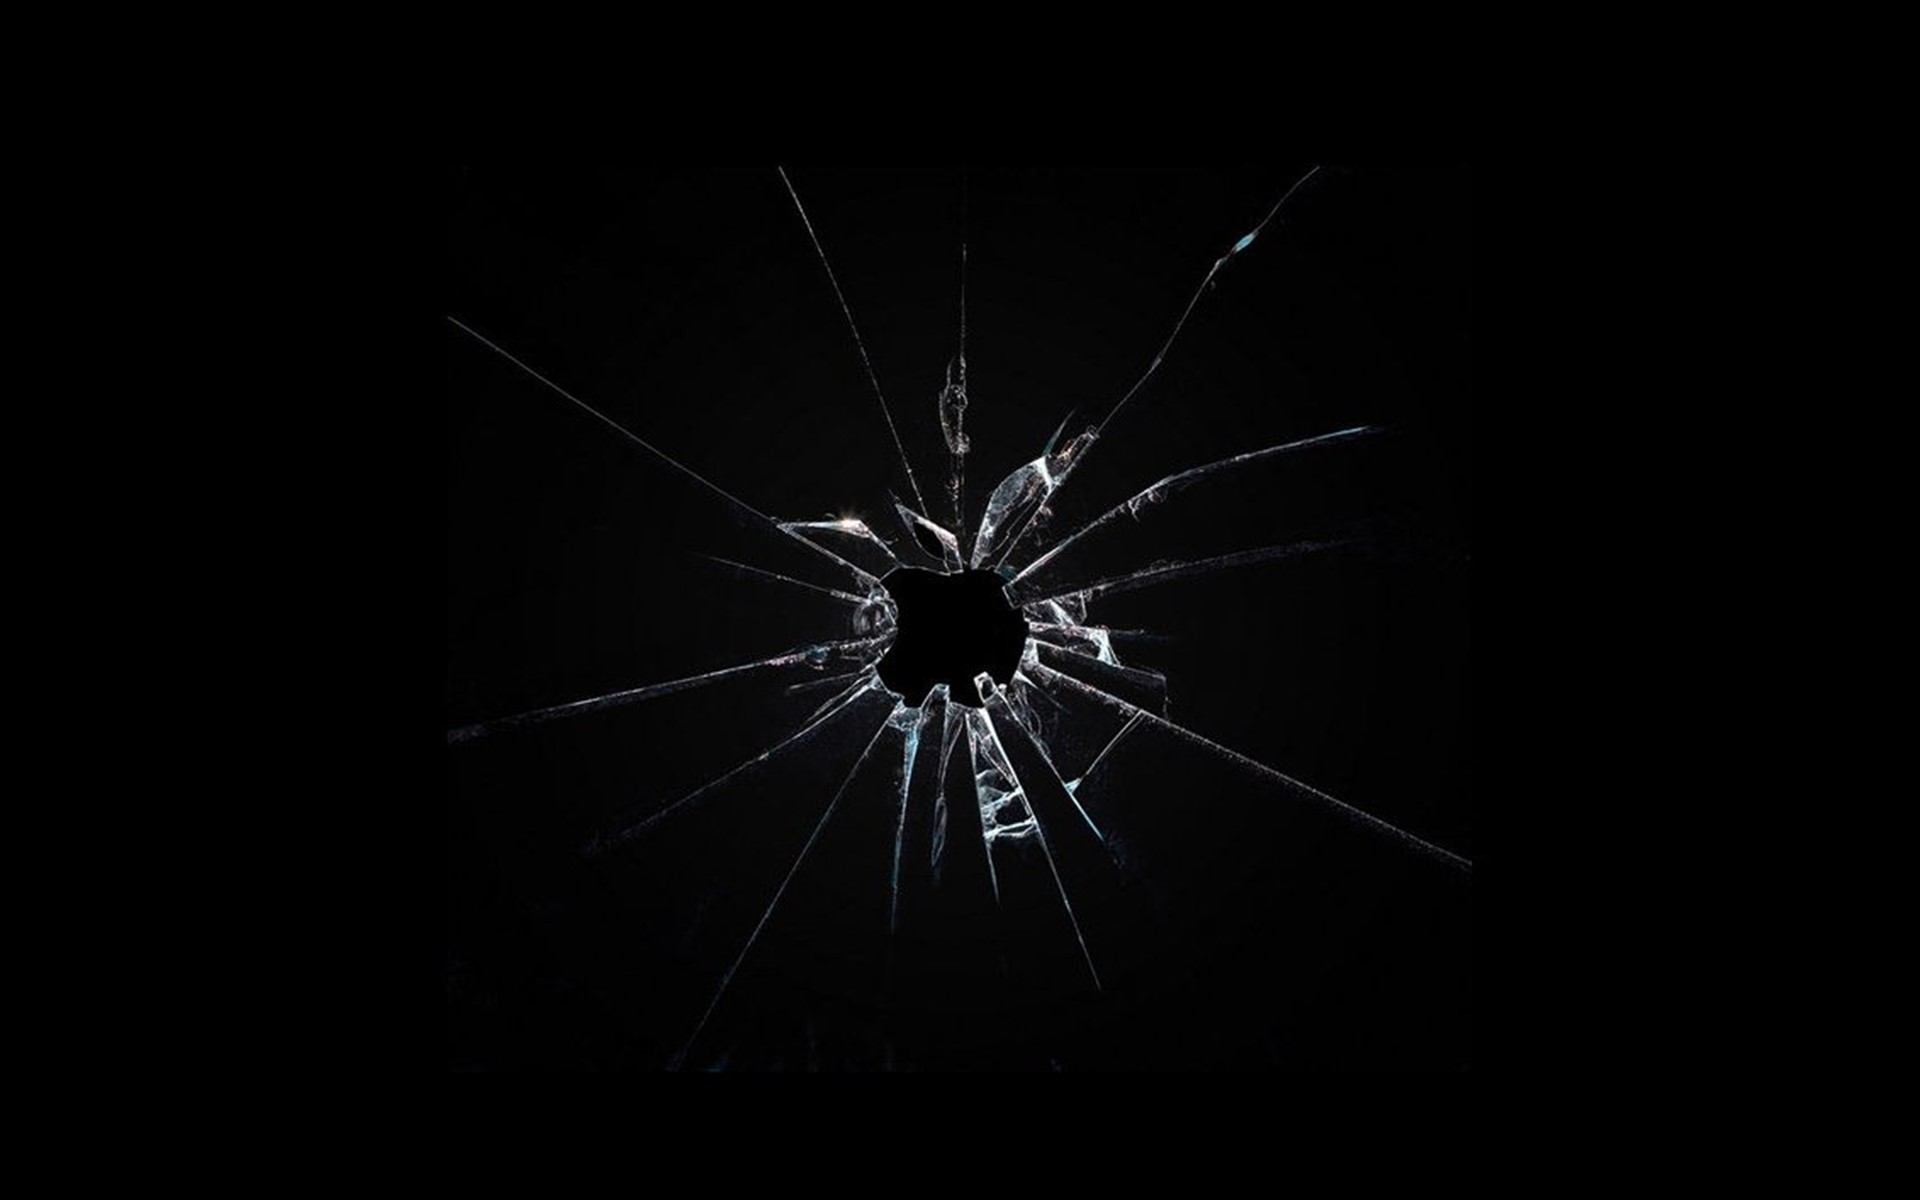 Pin on Cracked Screen Wallpaper